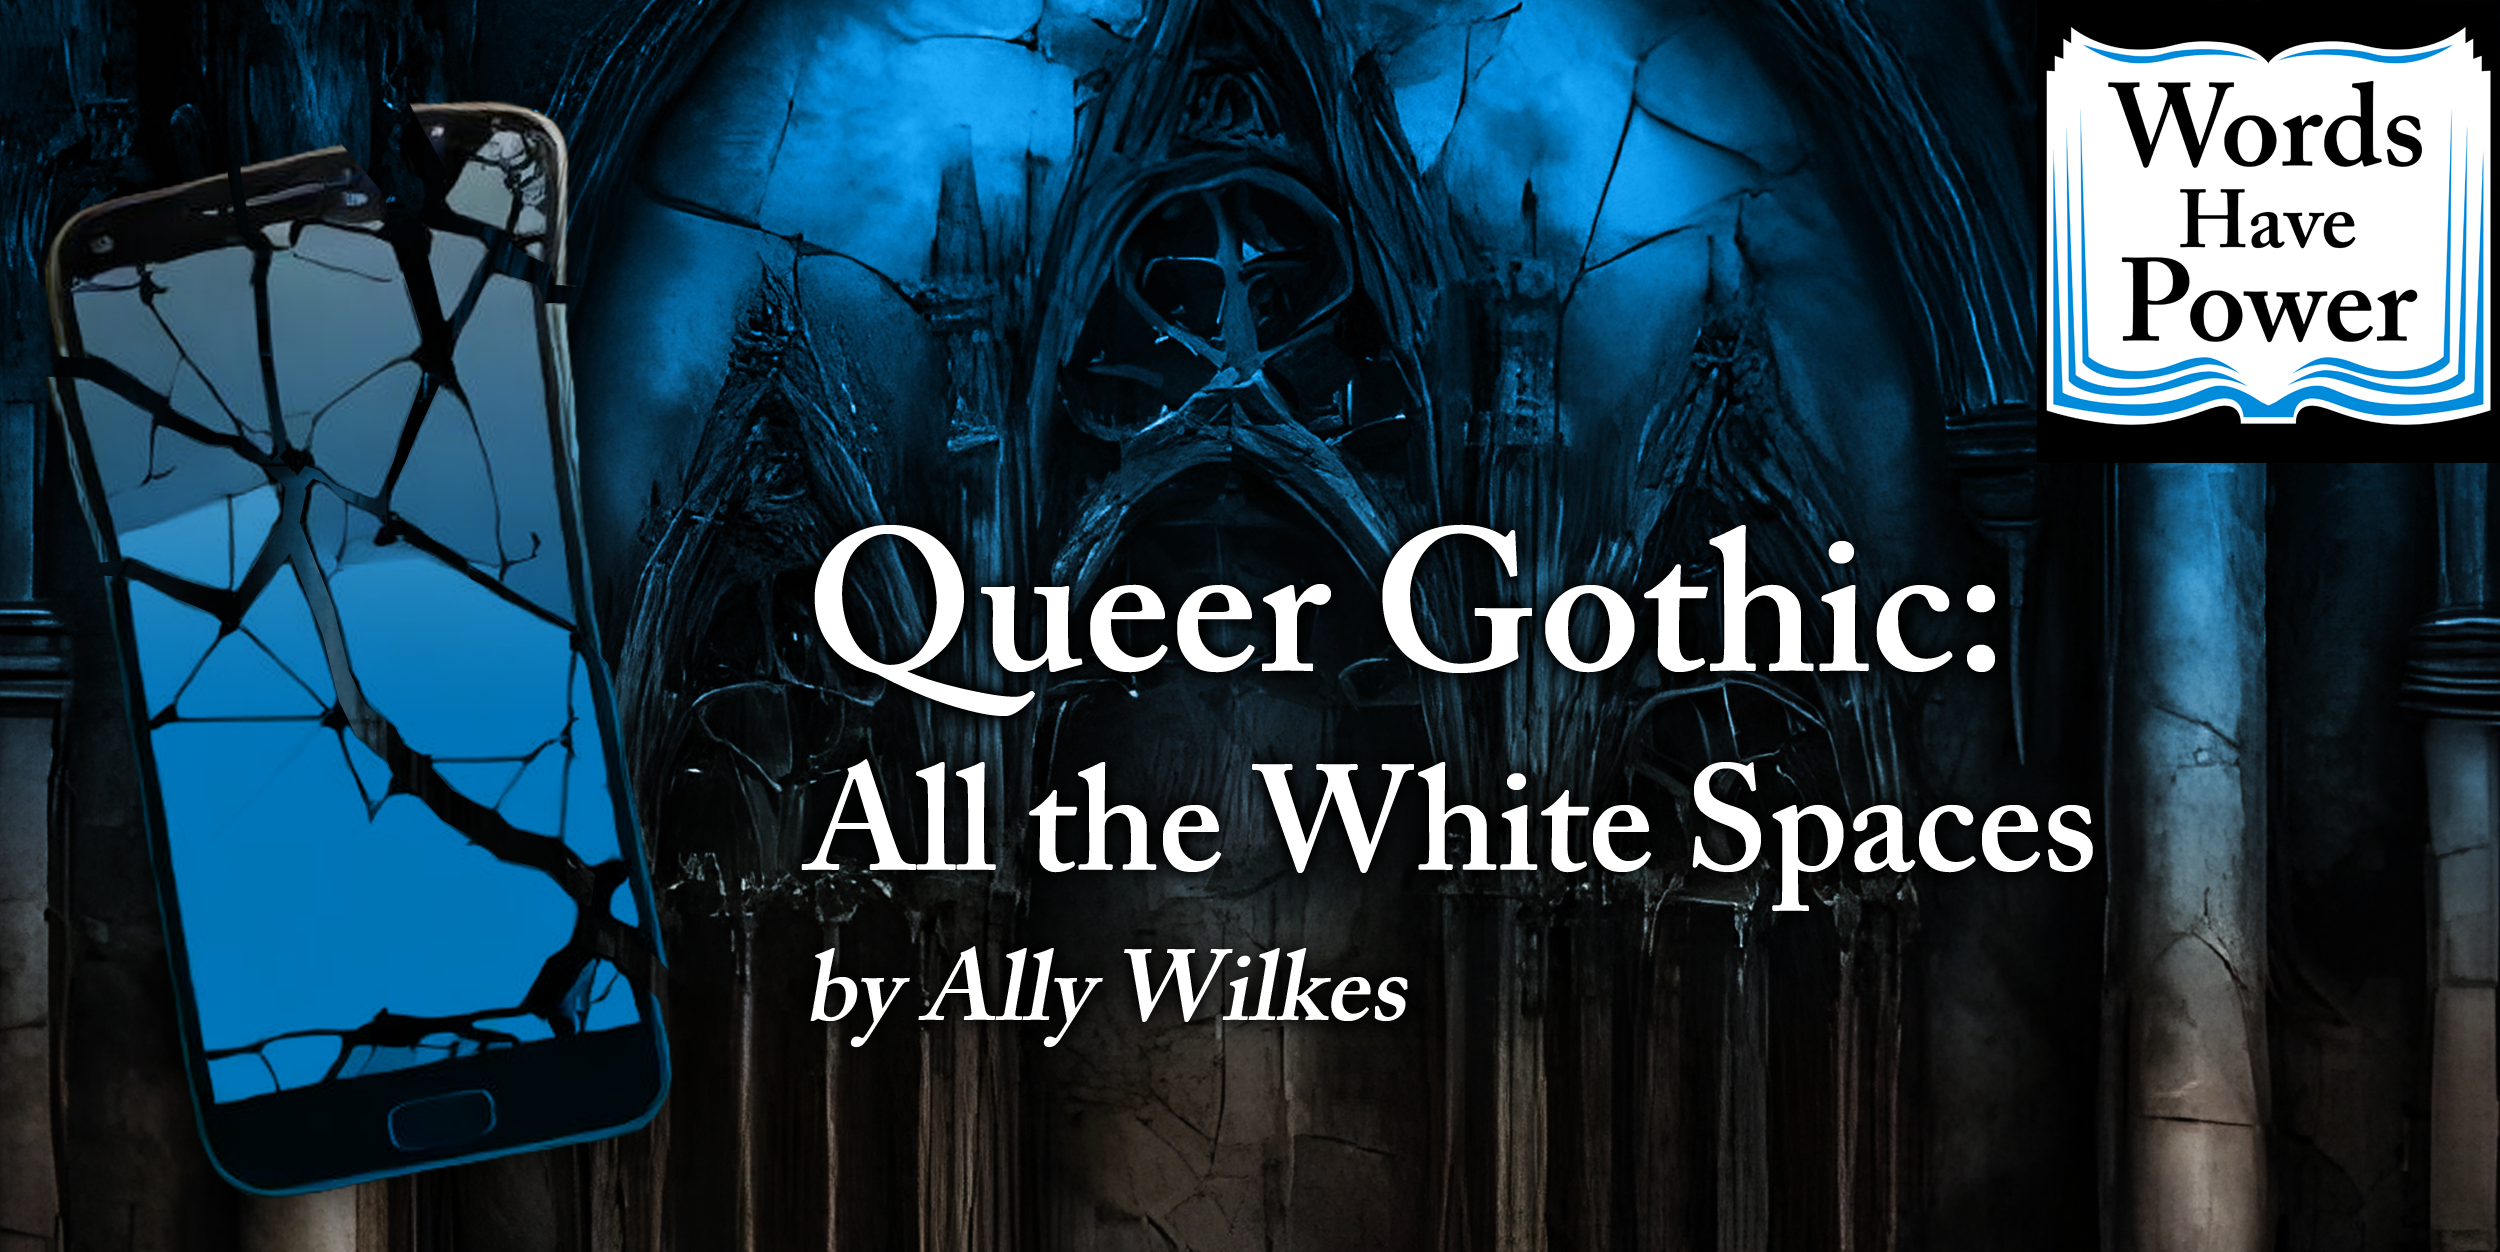 Queer Gothic: All the White Spaces by Ally Wilkes